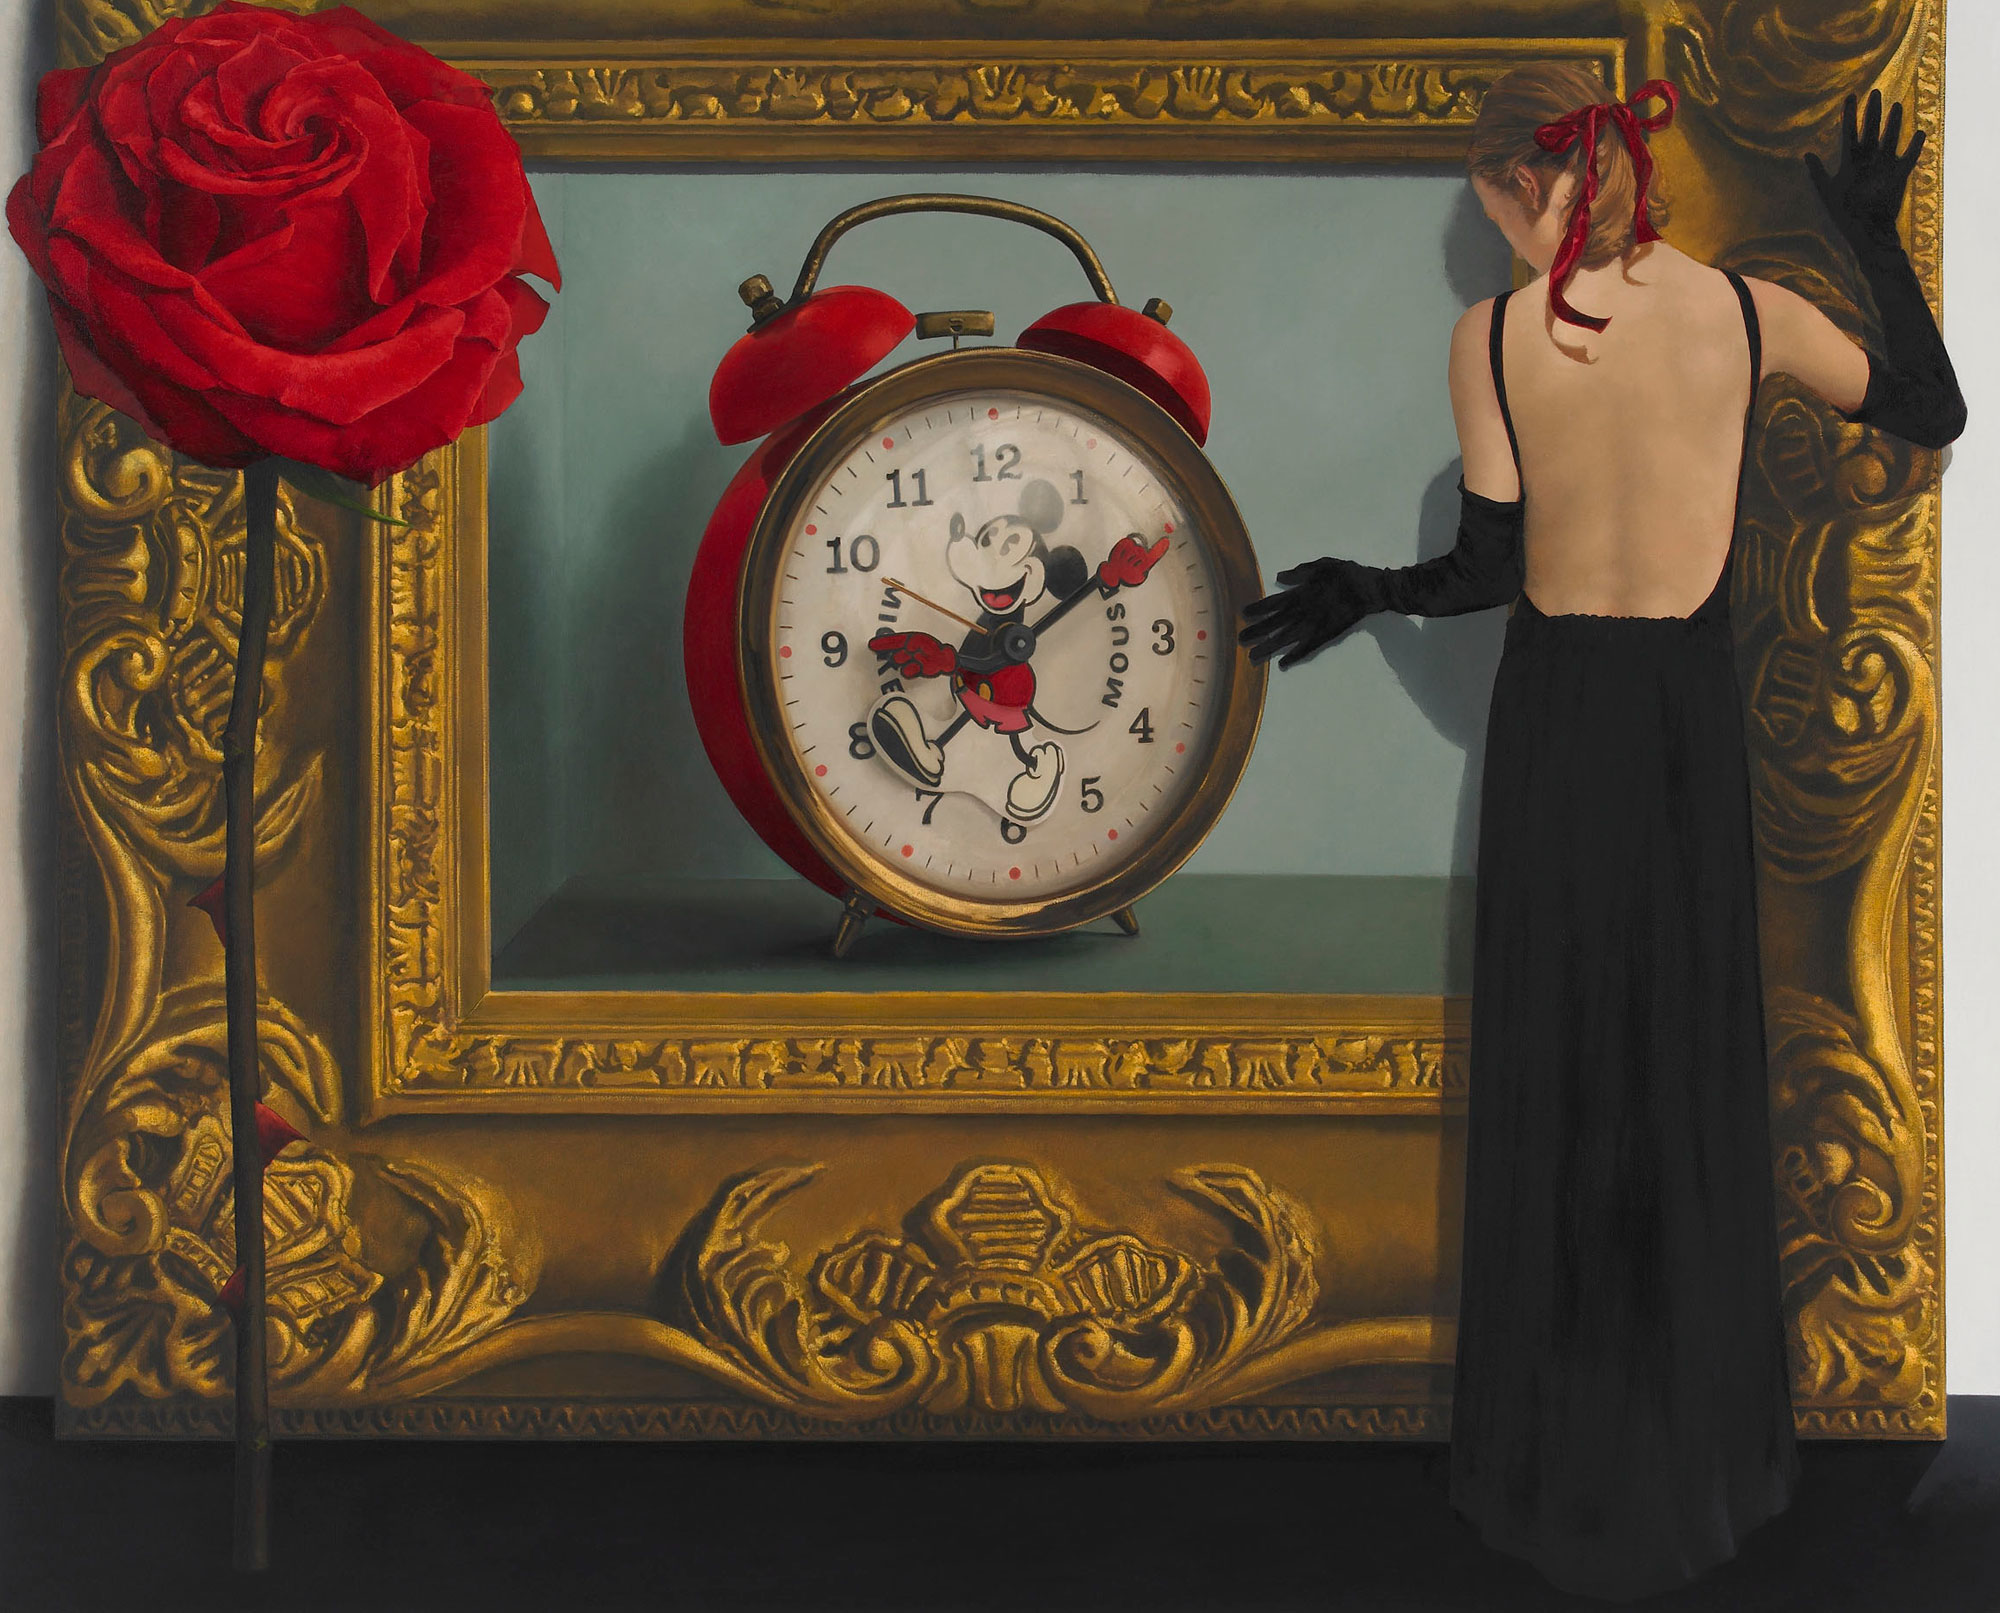 gold frame mickey mouse clock red rose figure leaning on frame (Samantha)